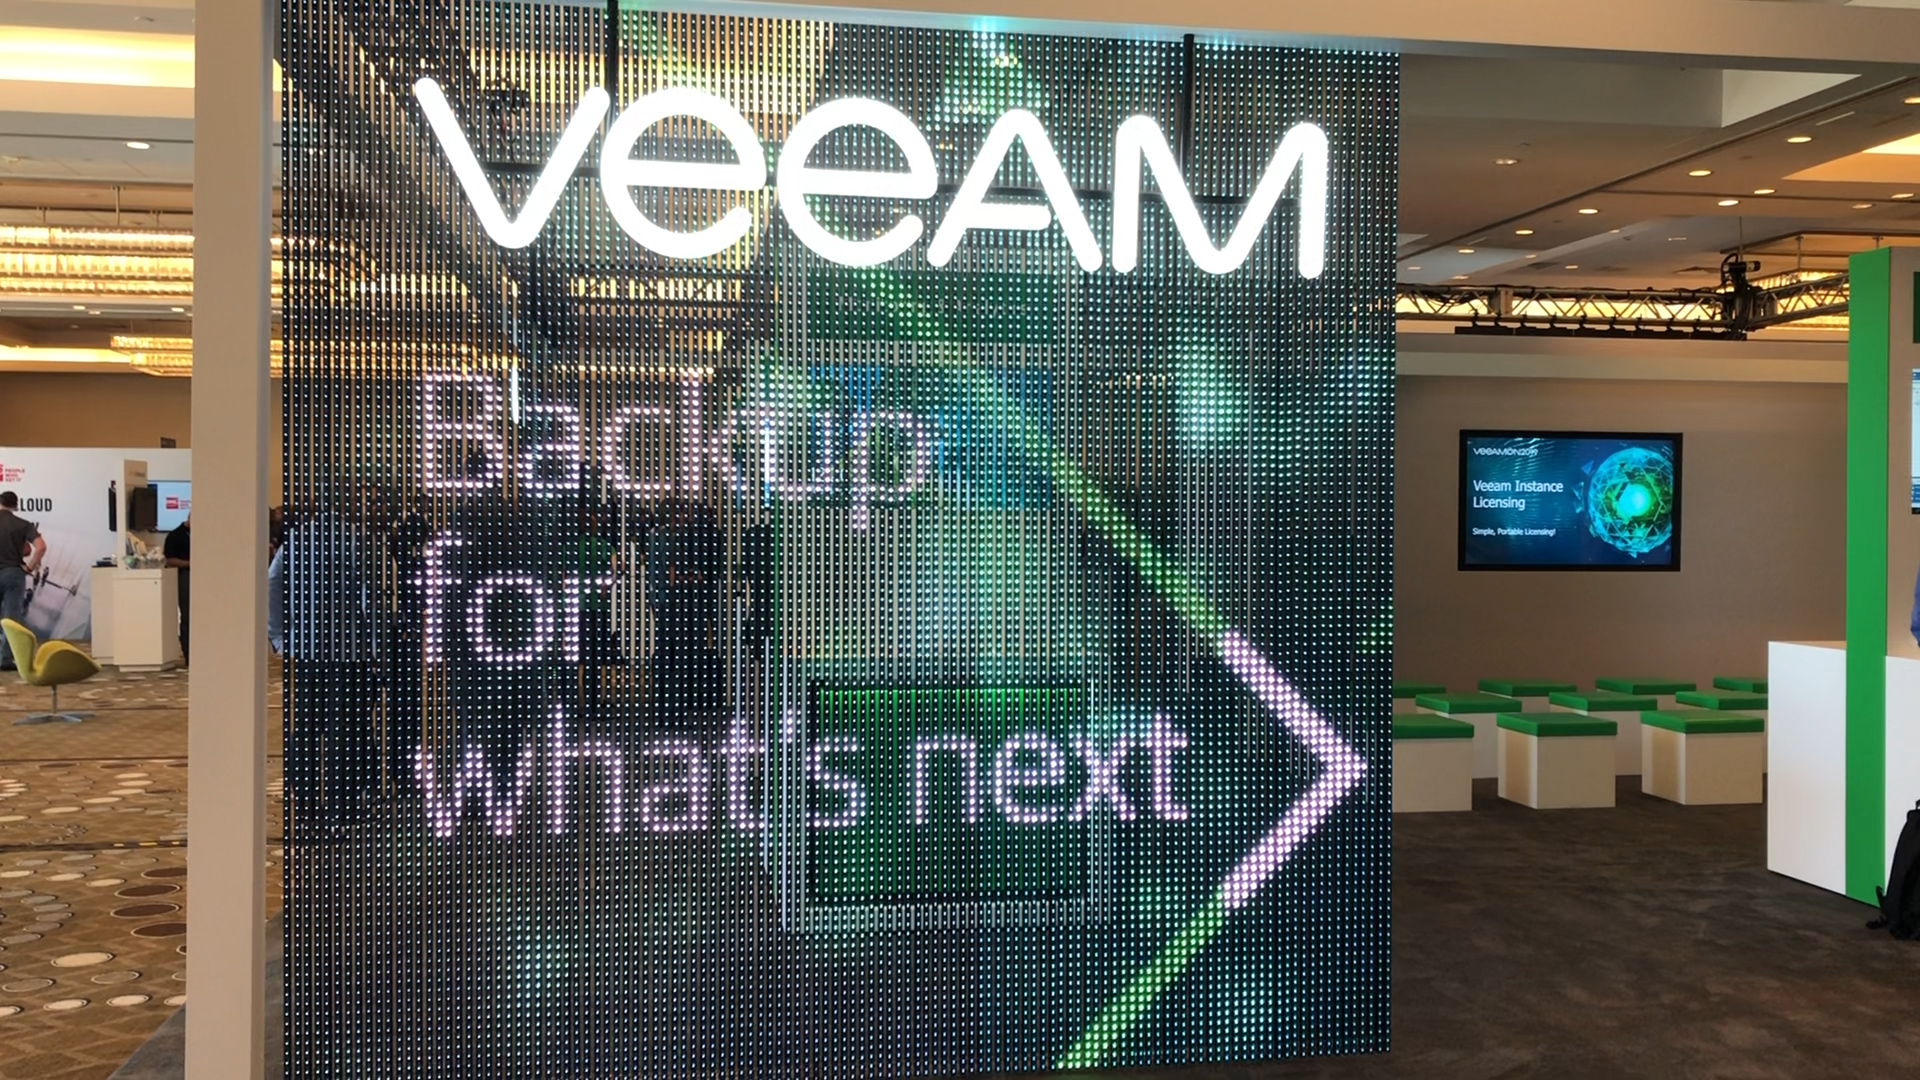 Insights from VeeamON 2019